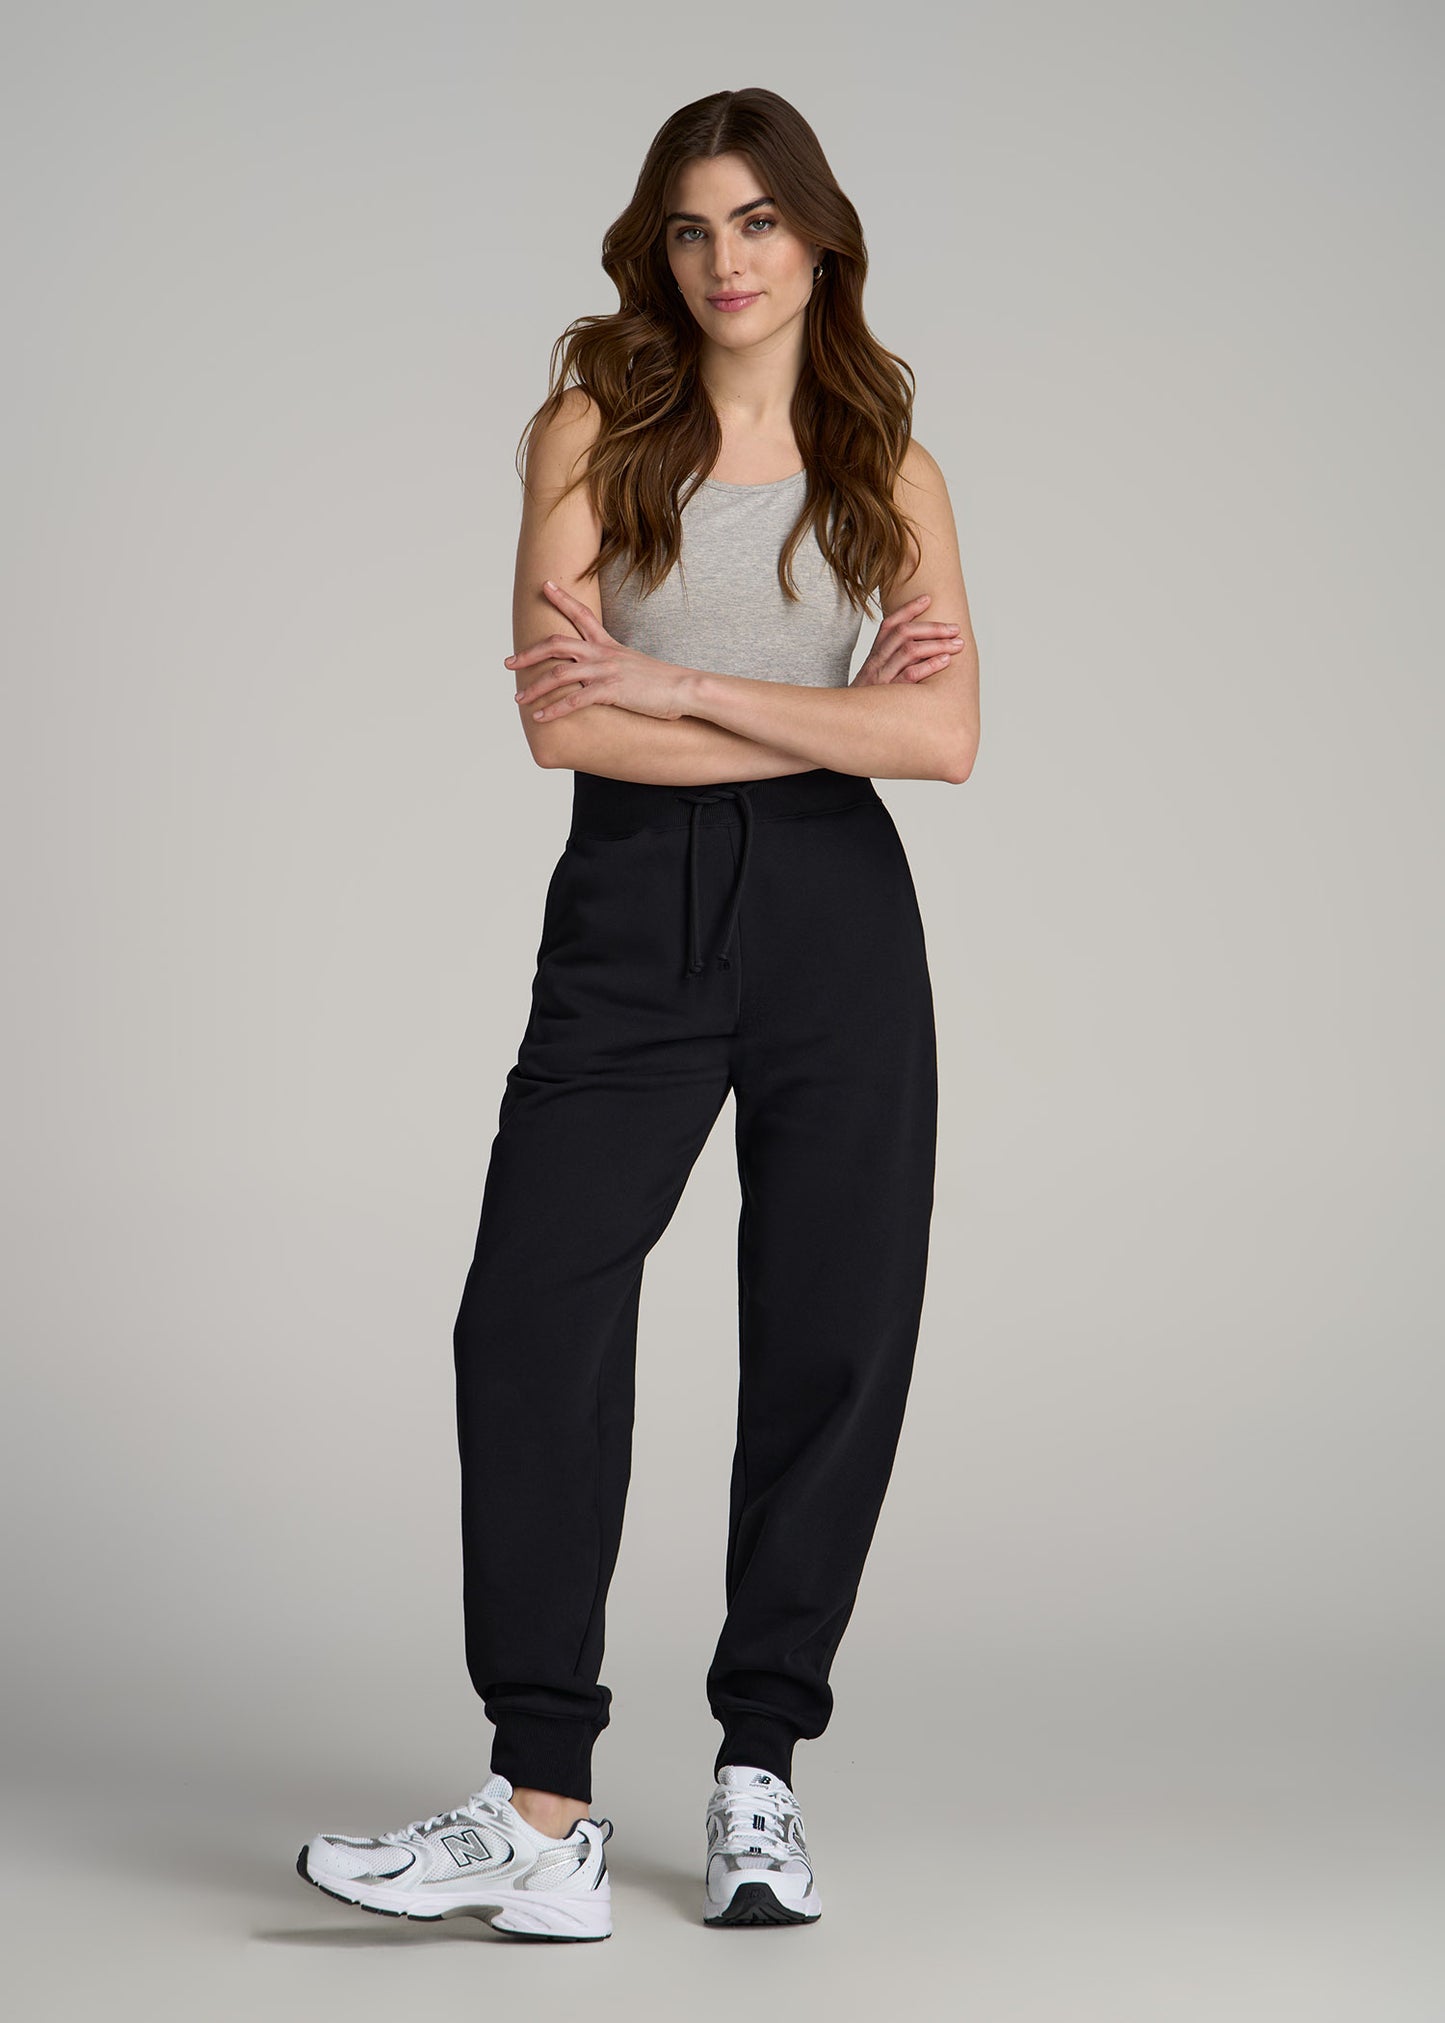 A tall woman wearing A.T. Basics Athletic Joggers for Tall Women in Black from American Tall